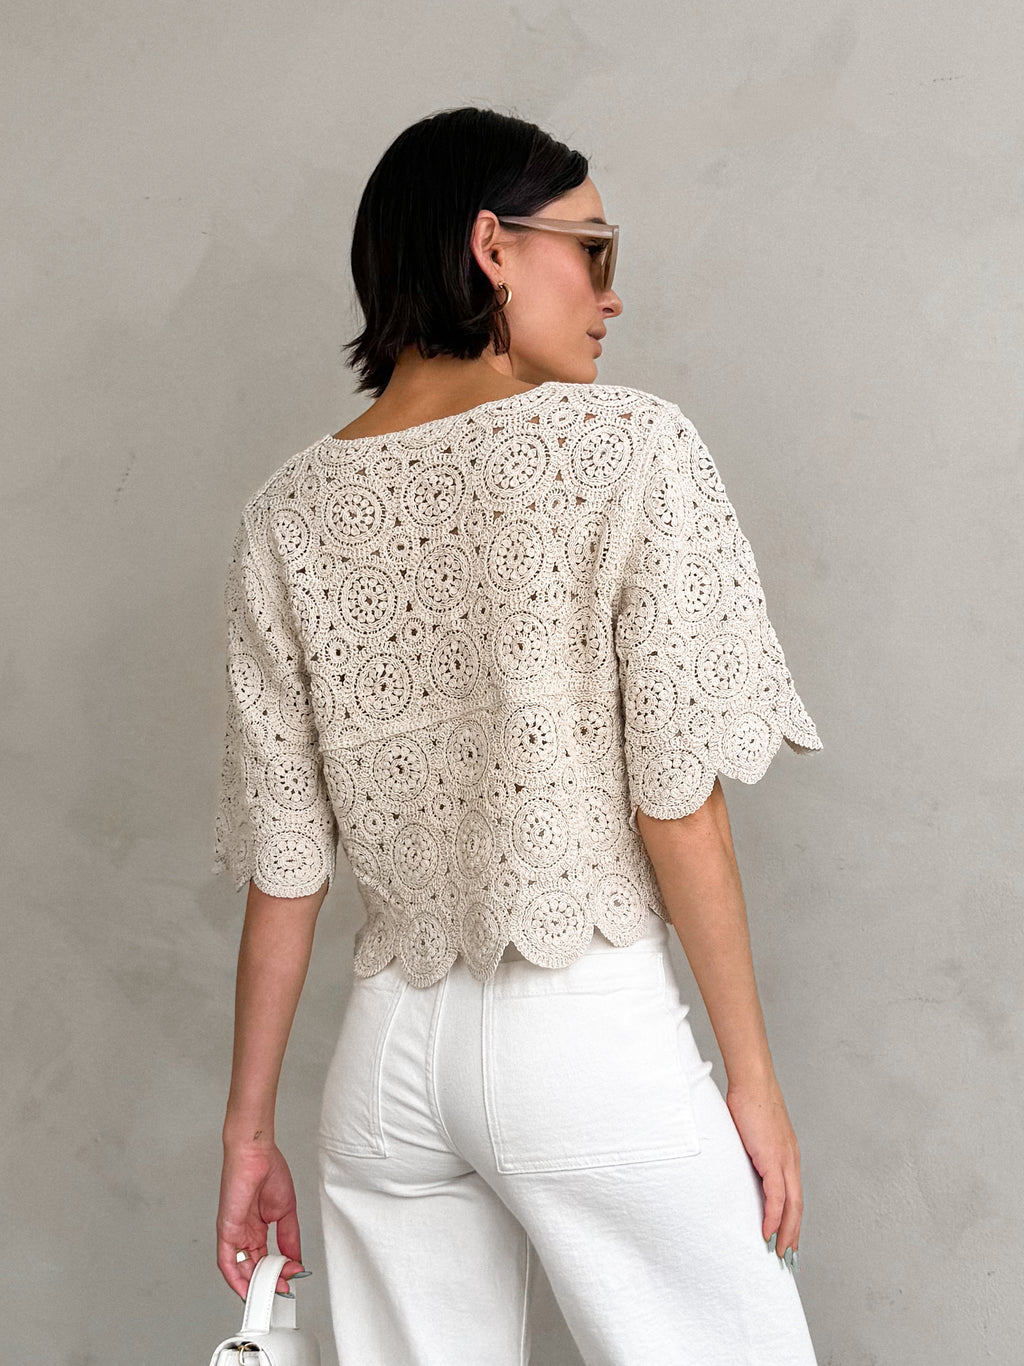 Kenia Crochet Top - Stitch And Feather